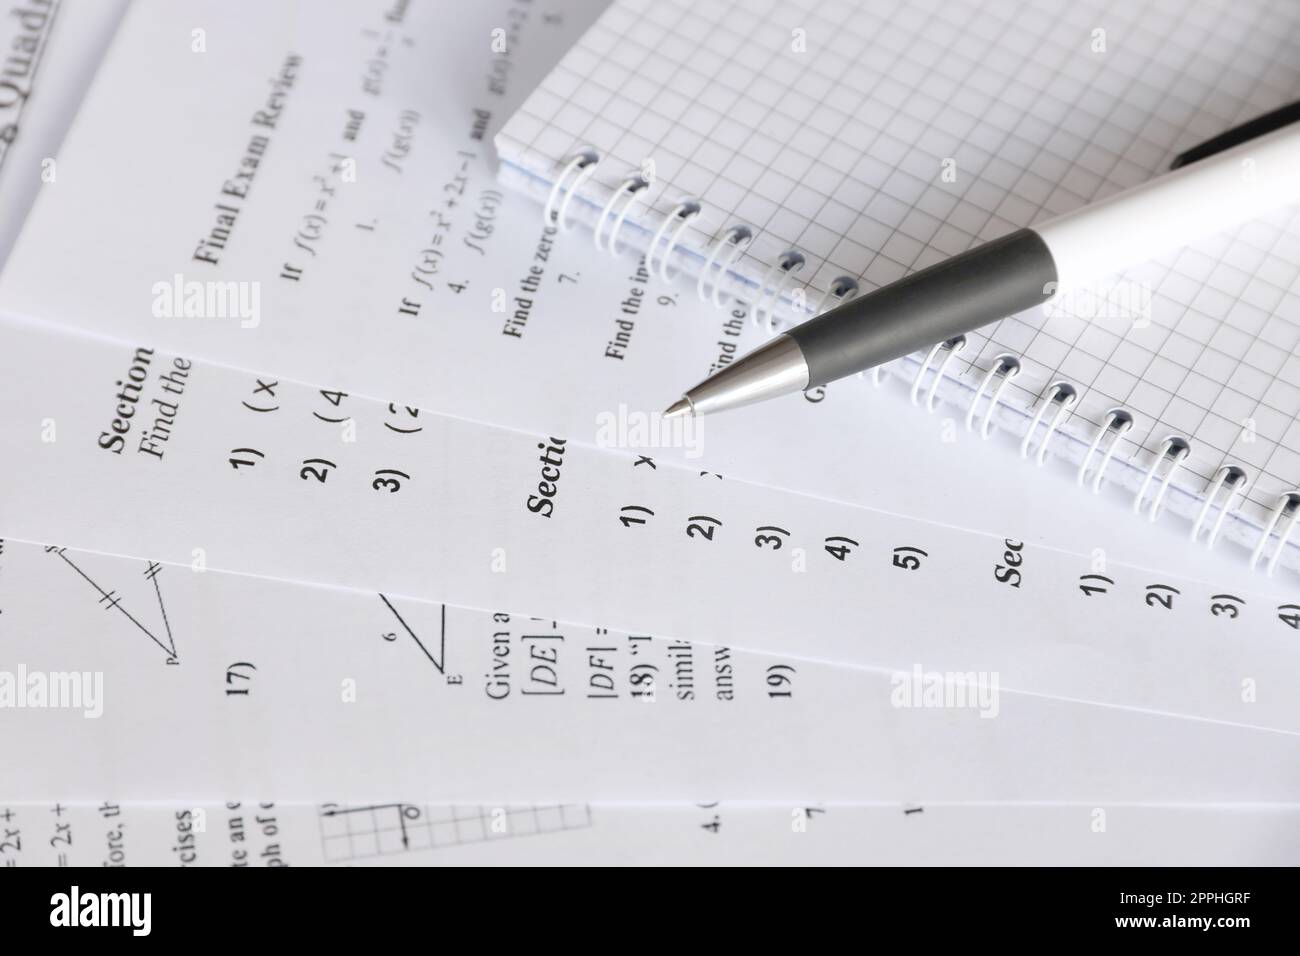 Handwriting of mathematics quadratic equation on examination, practice, quiz or test in maths class. Solving exponential equations concept. Stock Photo